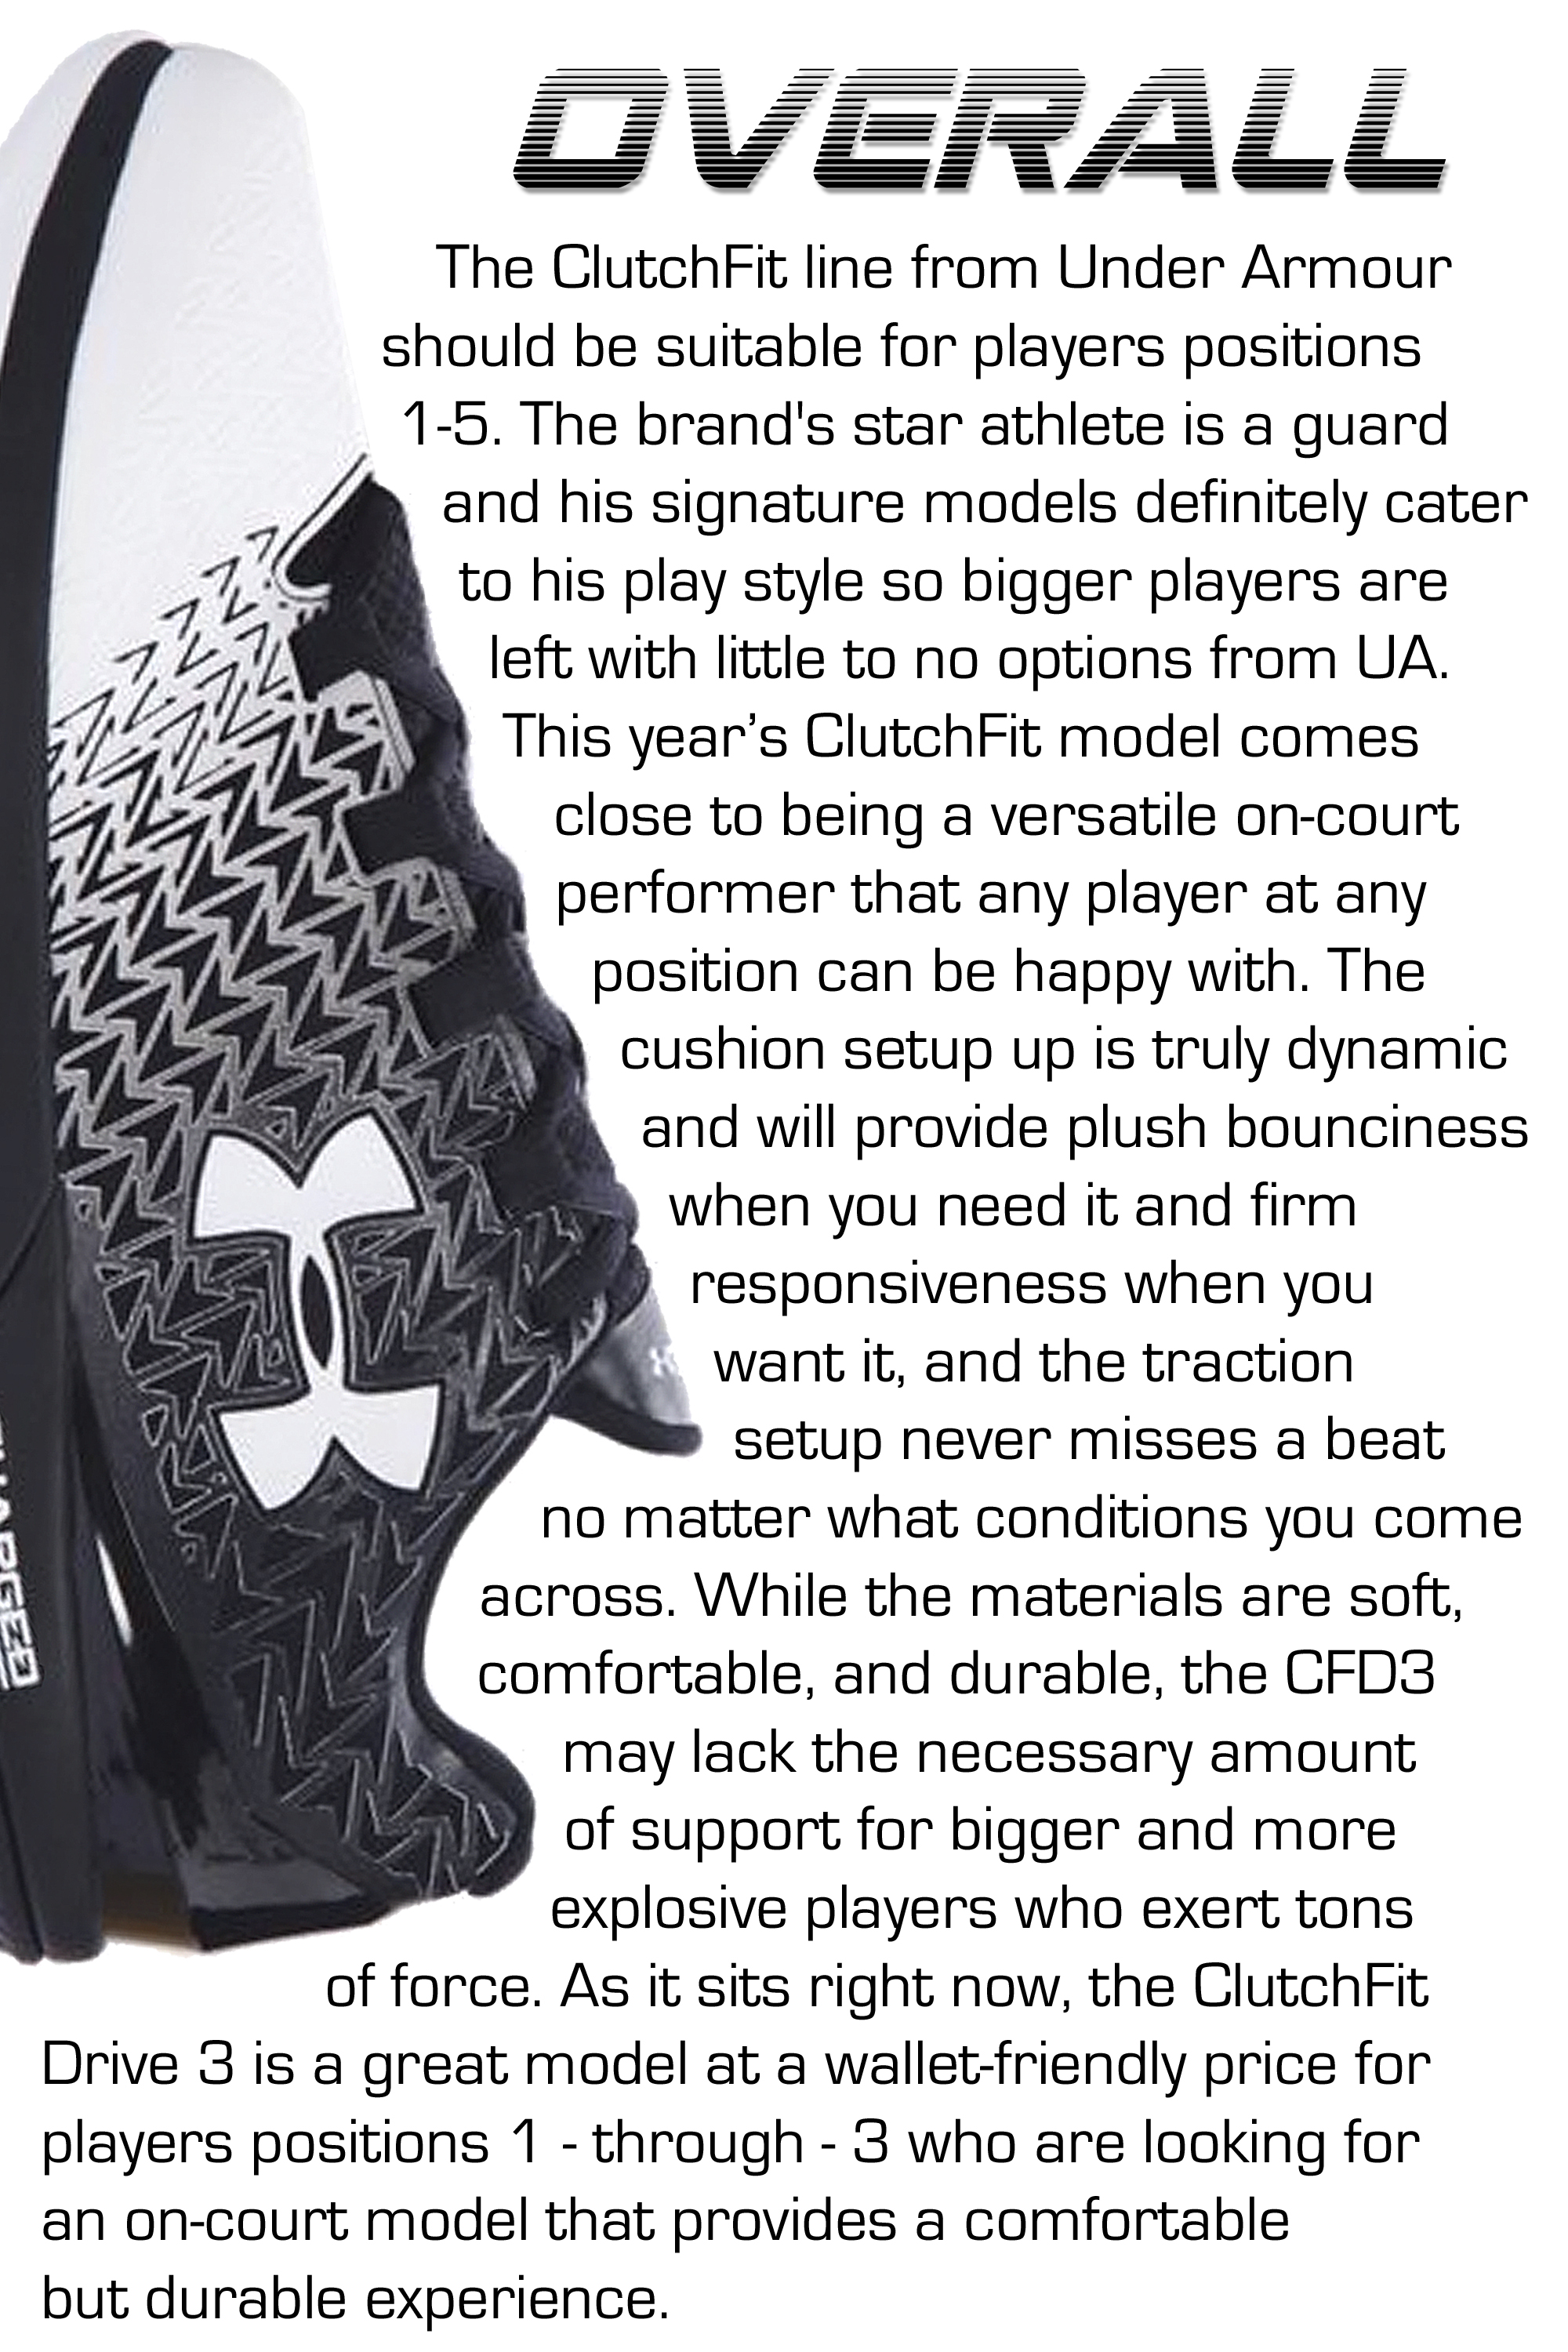 under armour clutchfit drive 3 performance review overall